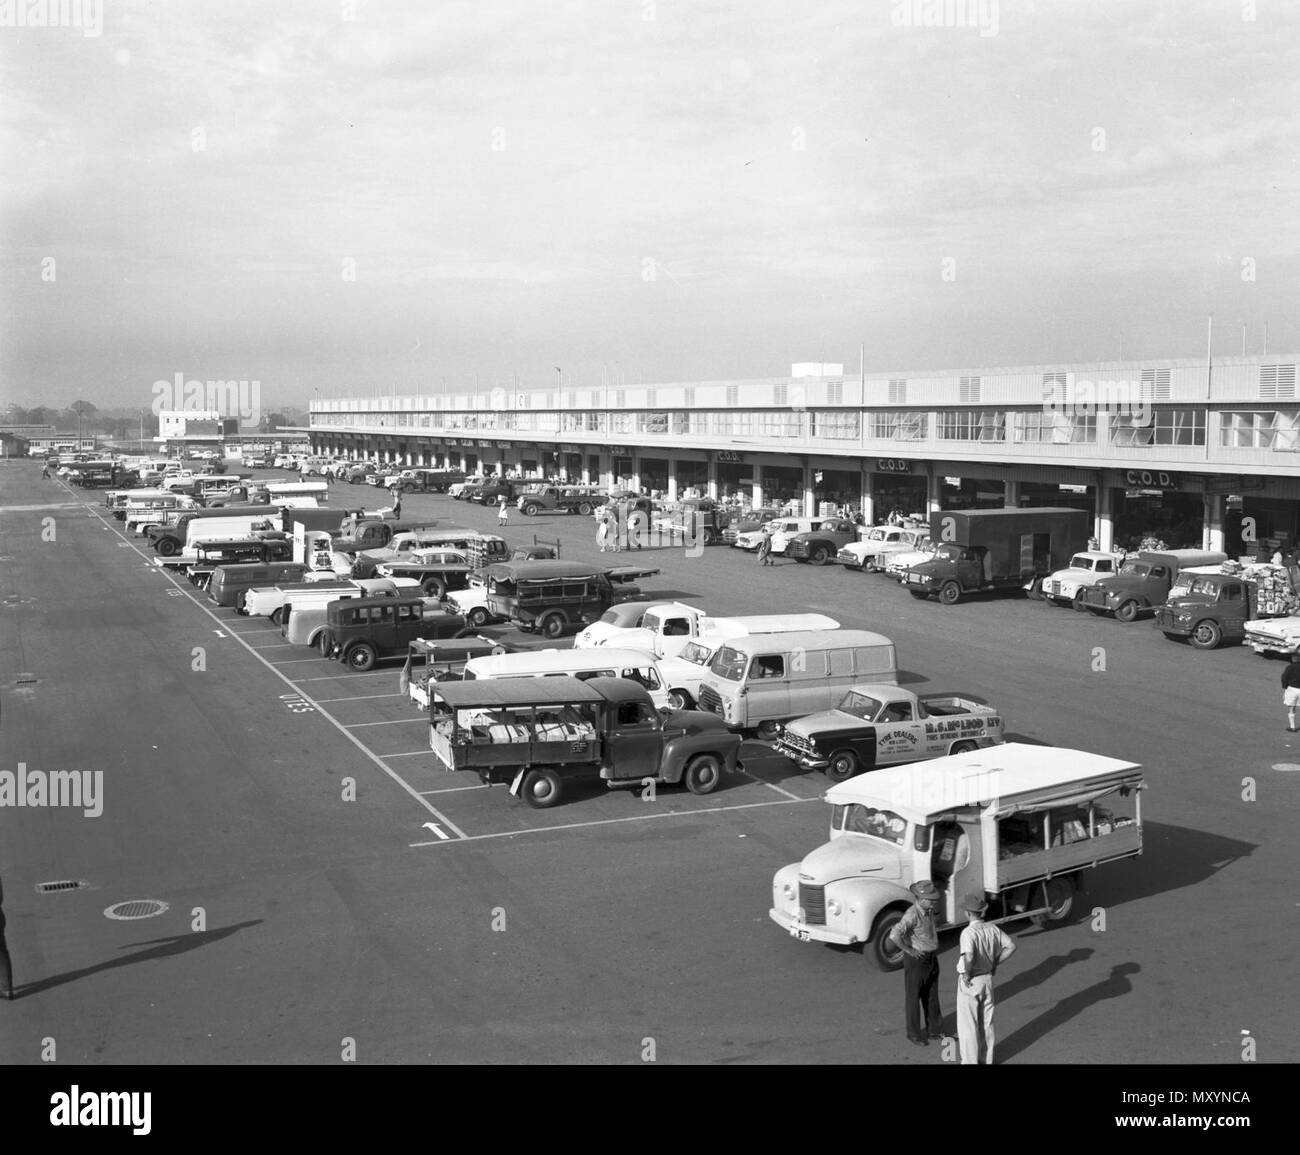 New Brisbane Produce Markets, Rocklea, August 1964. Brisbane’s first Central Market began in 1868 in a Brisbane Municipal Council built shed on the corner of Charlotte and Eagle Streets. It closed in 1881 due to poor patronage.  In 1885, the Council opened the purpose-built Municipal Market in Roma Street, beside the railway station.  Due to increasing congestion, the State Government agreed to move the Central Market to Rocklea in 1964, were the Brisbane Markets are located today. Stock Photo